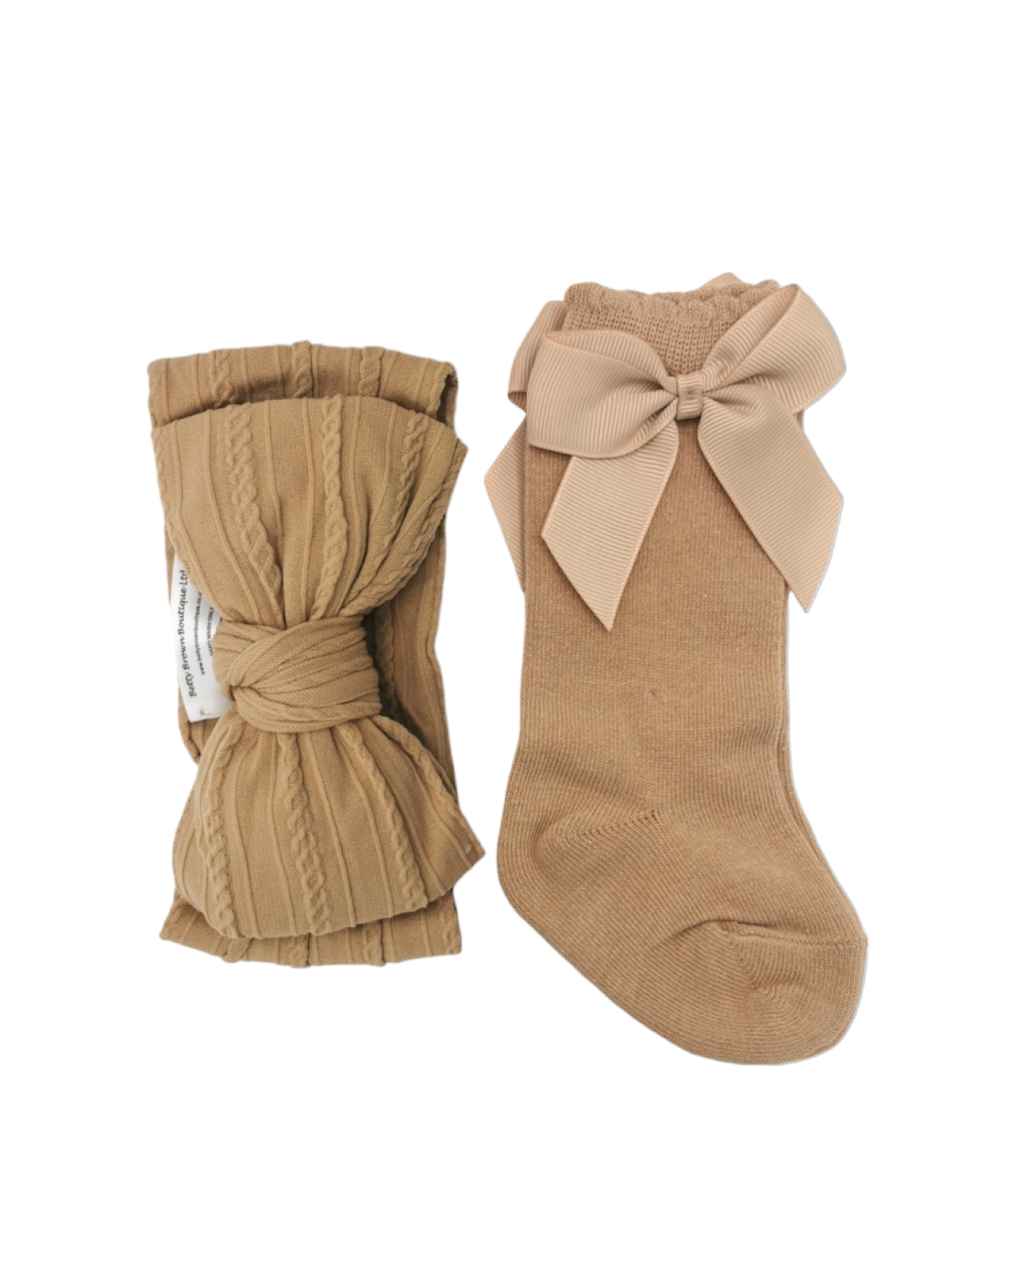 Our Coffee Larger Headwrap & Knee High Socks Set - Betty Brown Boutique Ltd